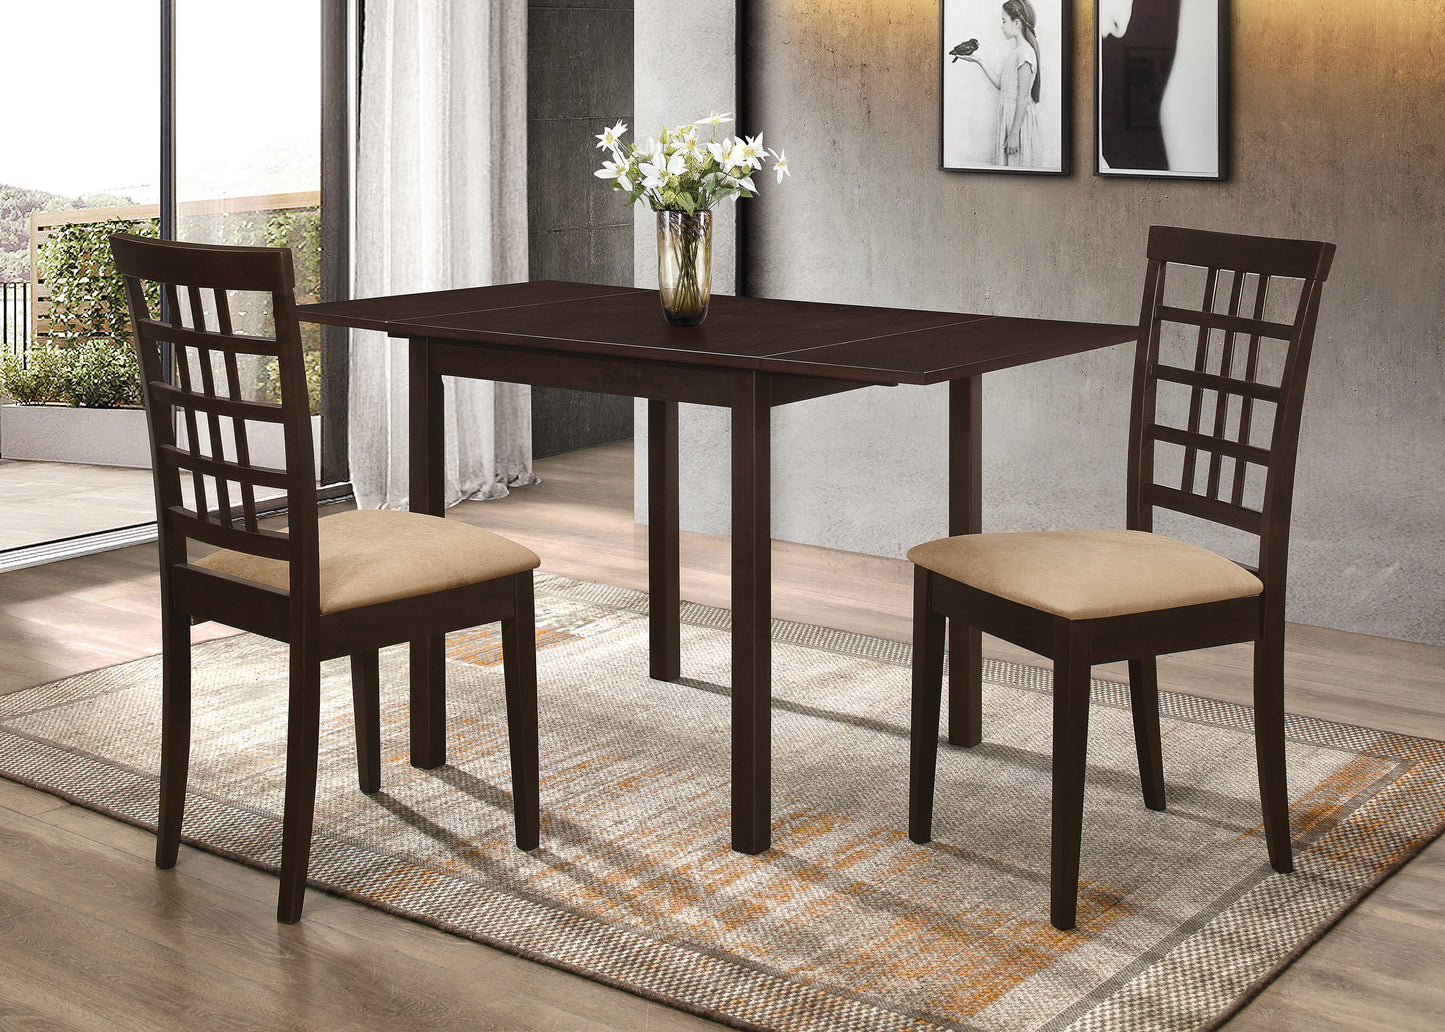 Kelso 3-Piece Drop Leaf Dining Set Cappuccino And Tan - 190821